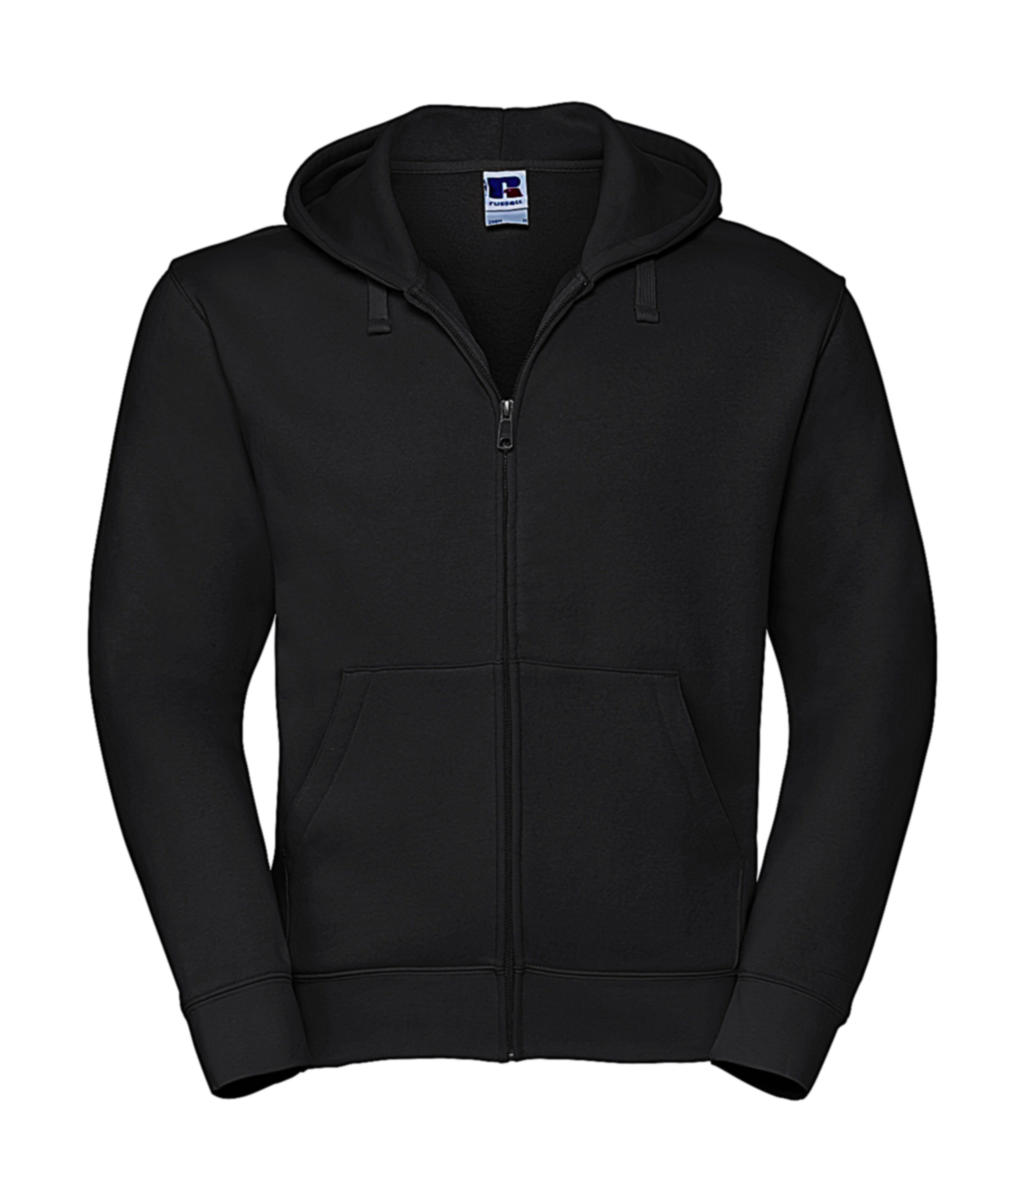  Mens Authentic Zipped Hood in Farbe Black